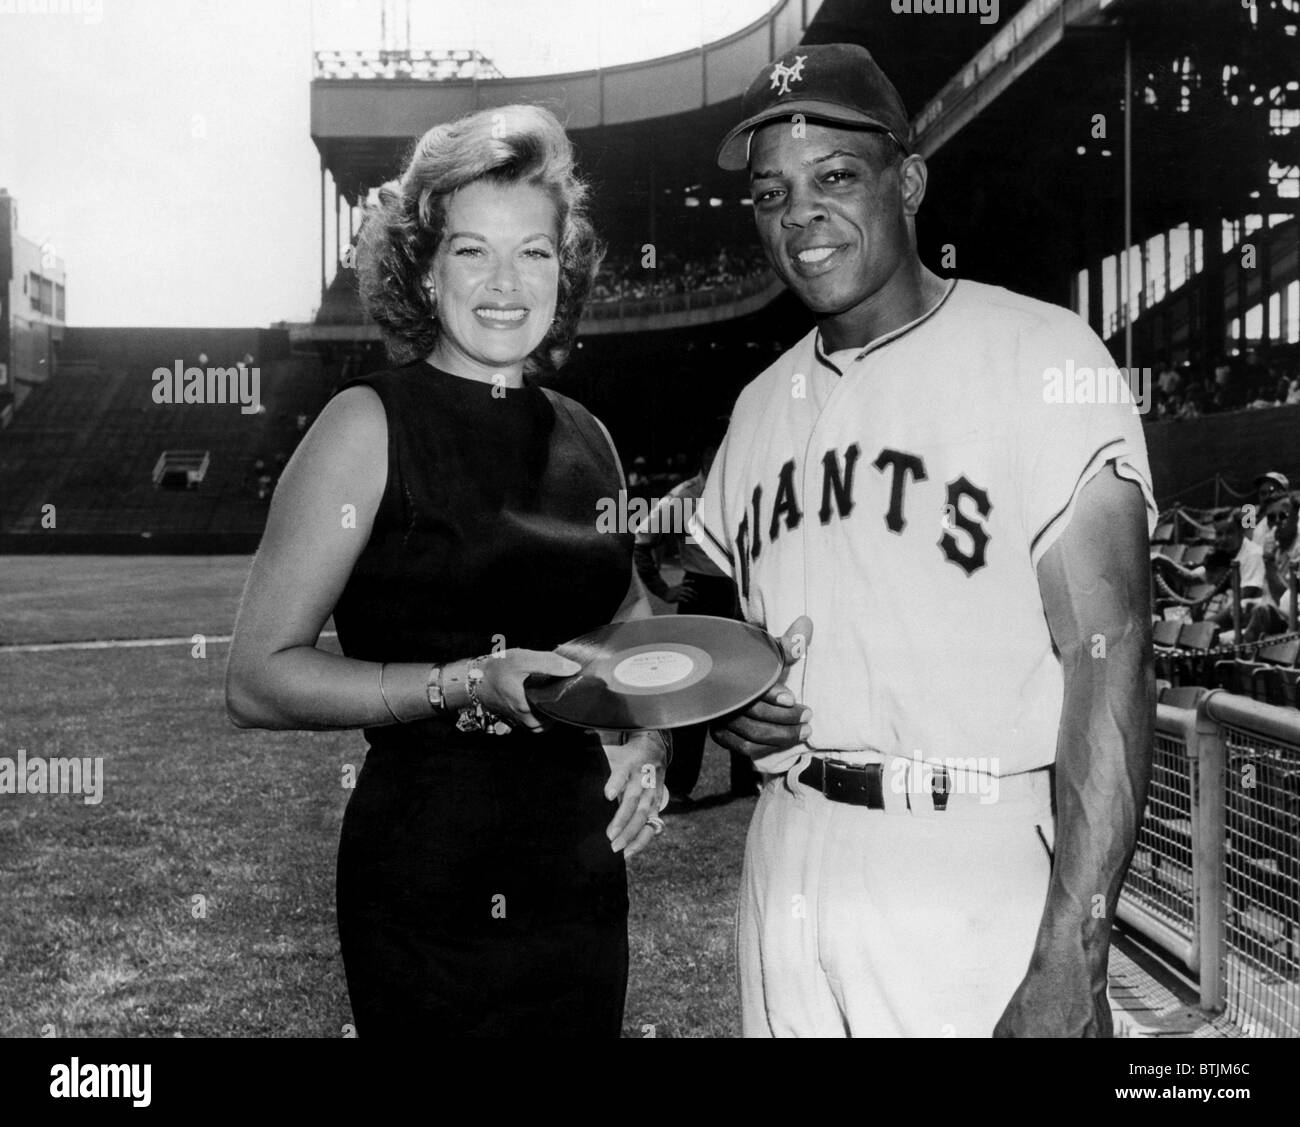 Willie Mays '61 uniform sells for $31,000 on 'Pawn Stars' (Video)